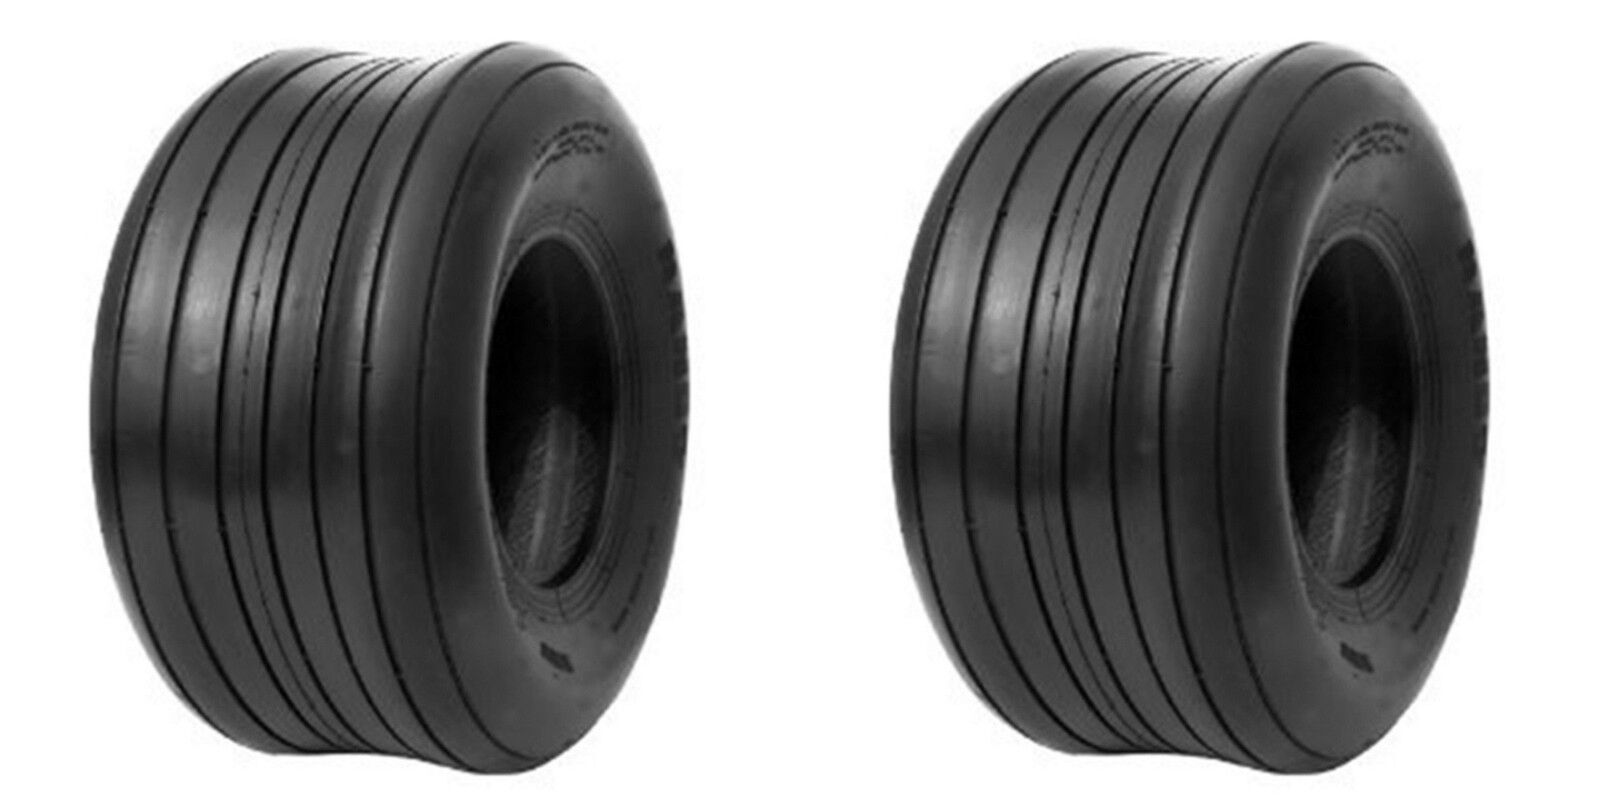 2 (TWO) 16x650-8 16x6.50-8 16x650x8  4PlyRated LAWN MOWER TUBELESS RIBBED TIRES 